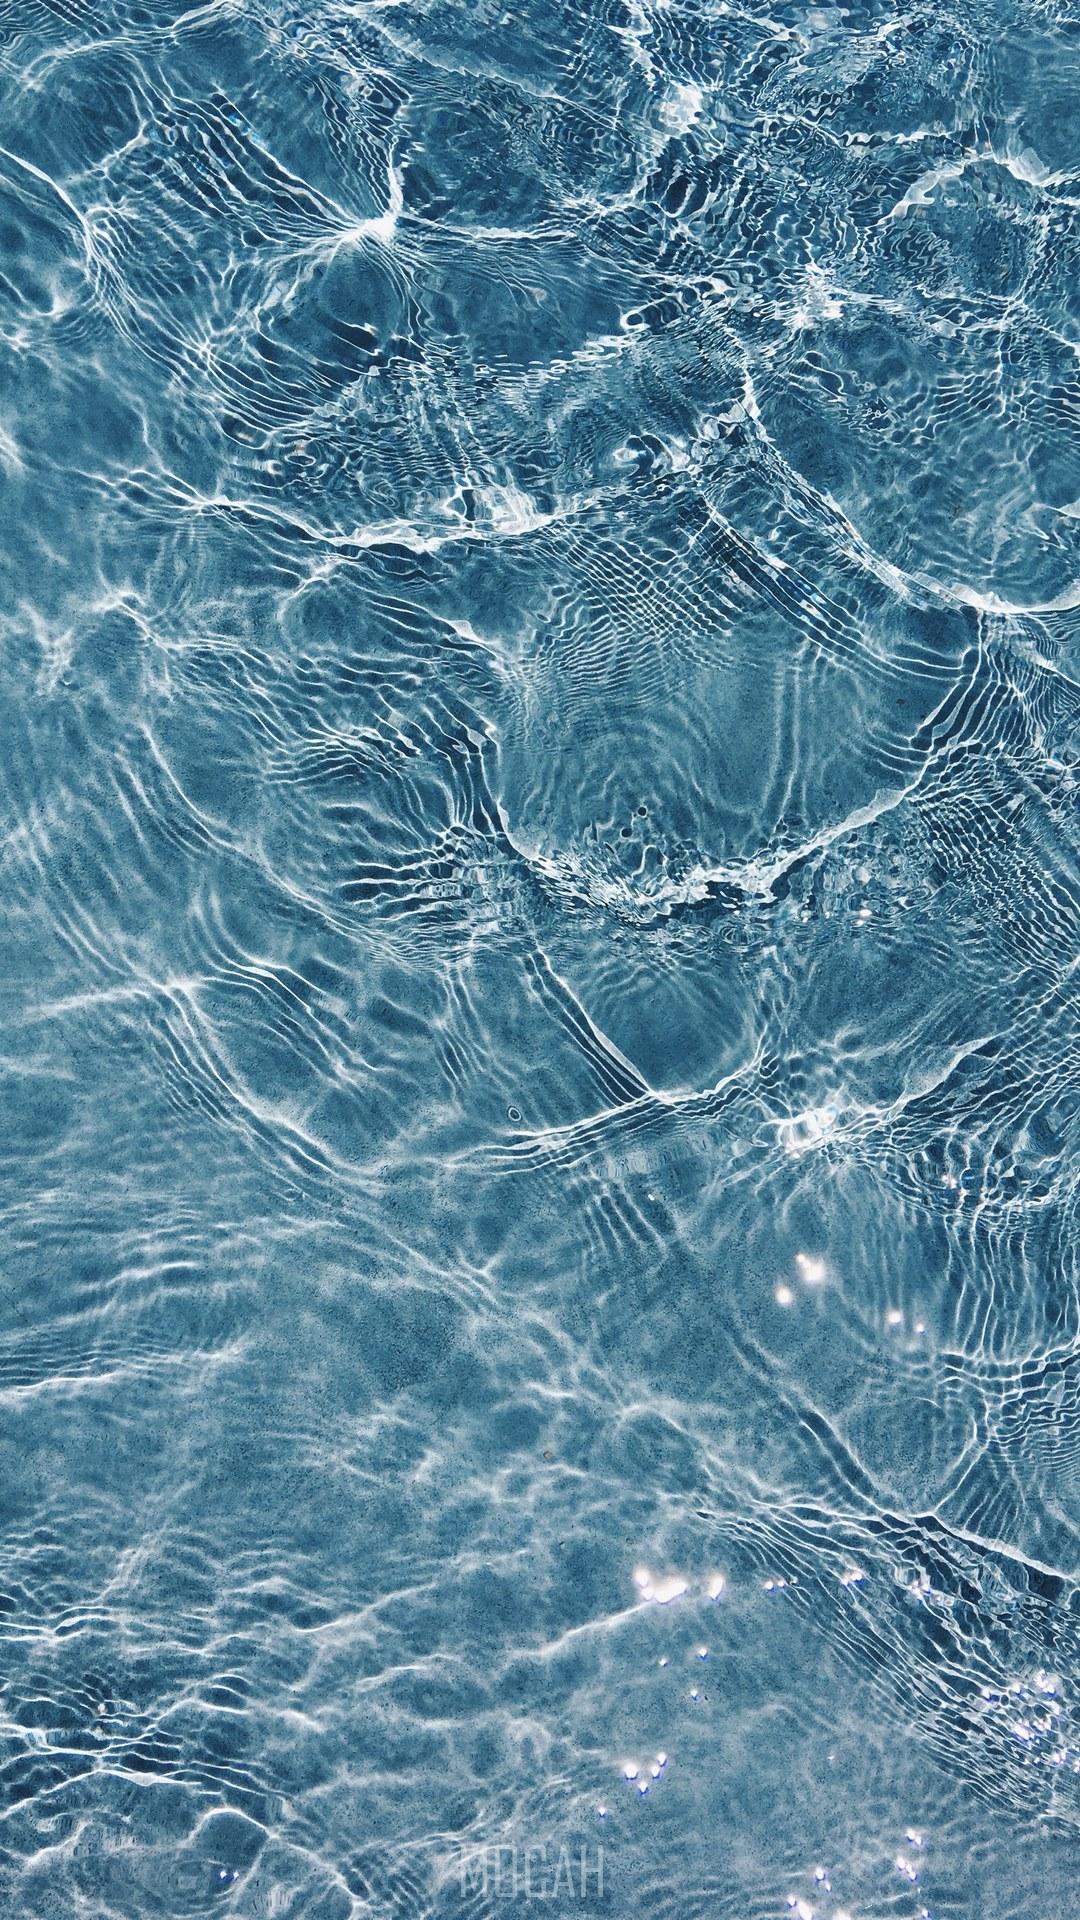 HD wallpaper, 1080X1920, Swimming Pool Reflections, Motorola Moto G4 Plus Wallpaper 1080P, A Reflection And Ripples In A Swimming Pool